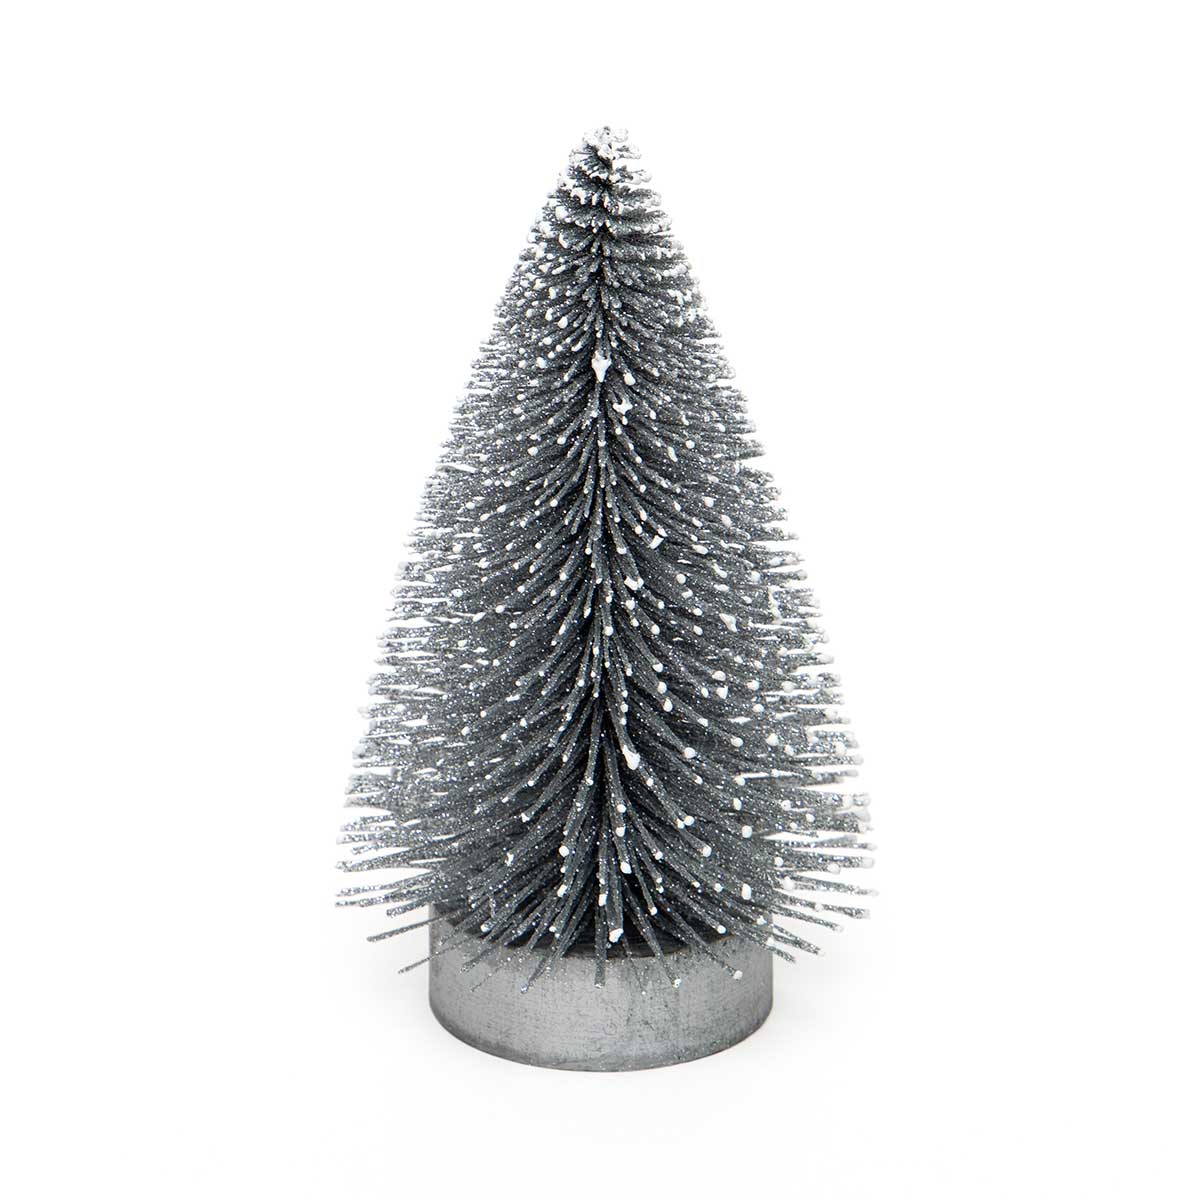 BRISTLE TREE SILVER WITH SNOWY TIPS, GLITTER AND WOOD BASE